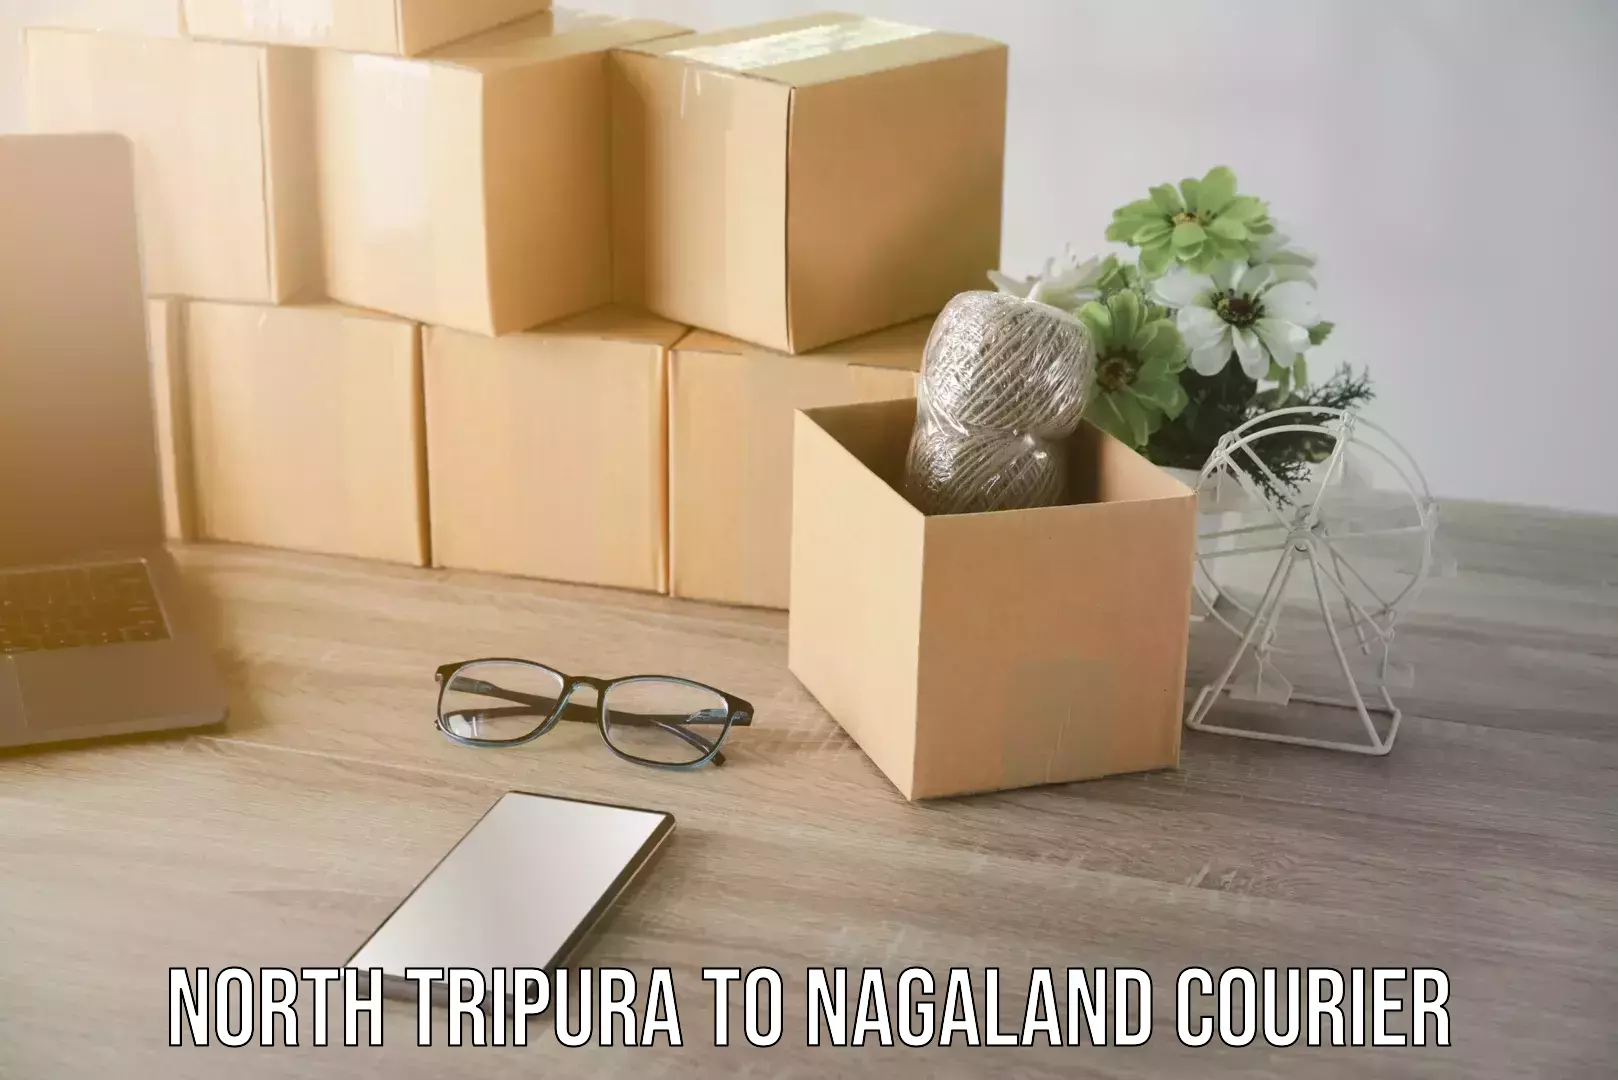 Speedy delivery service North Tripura to Nagaland